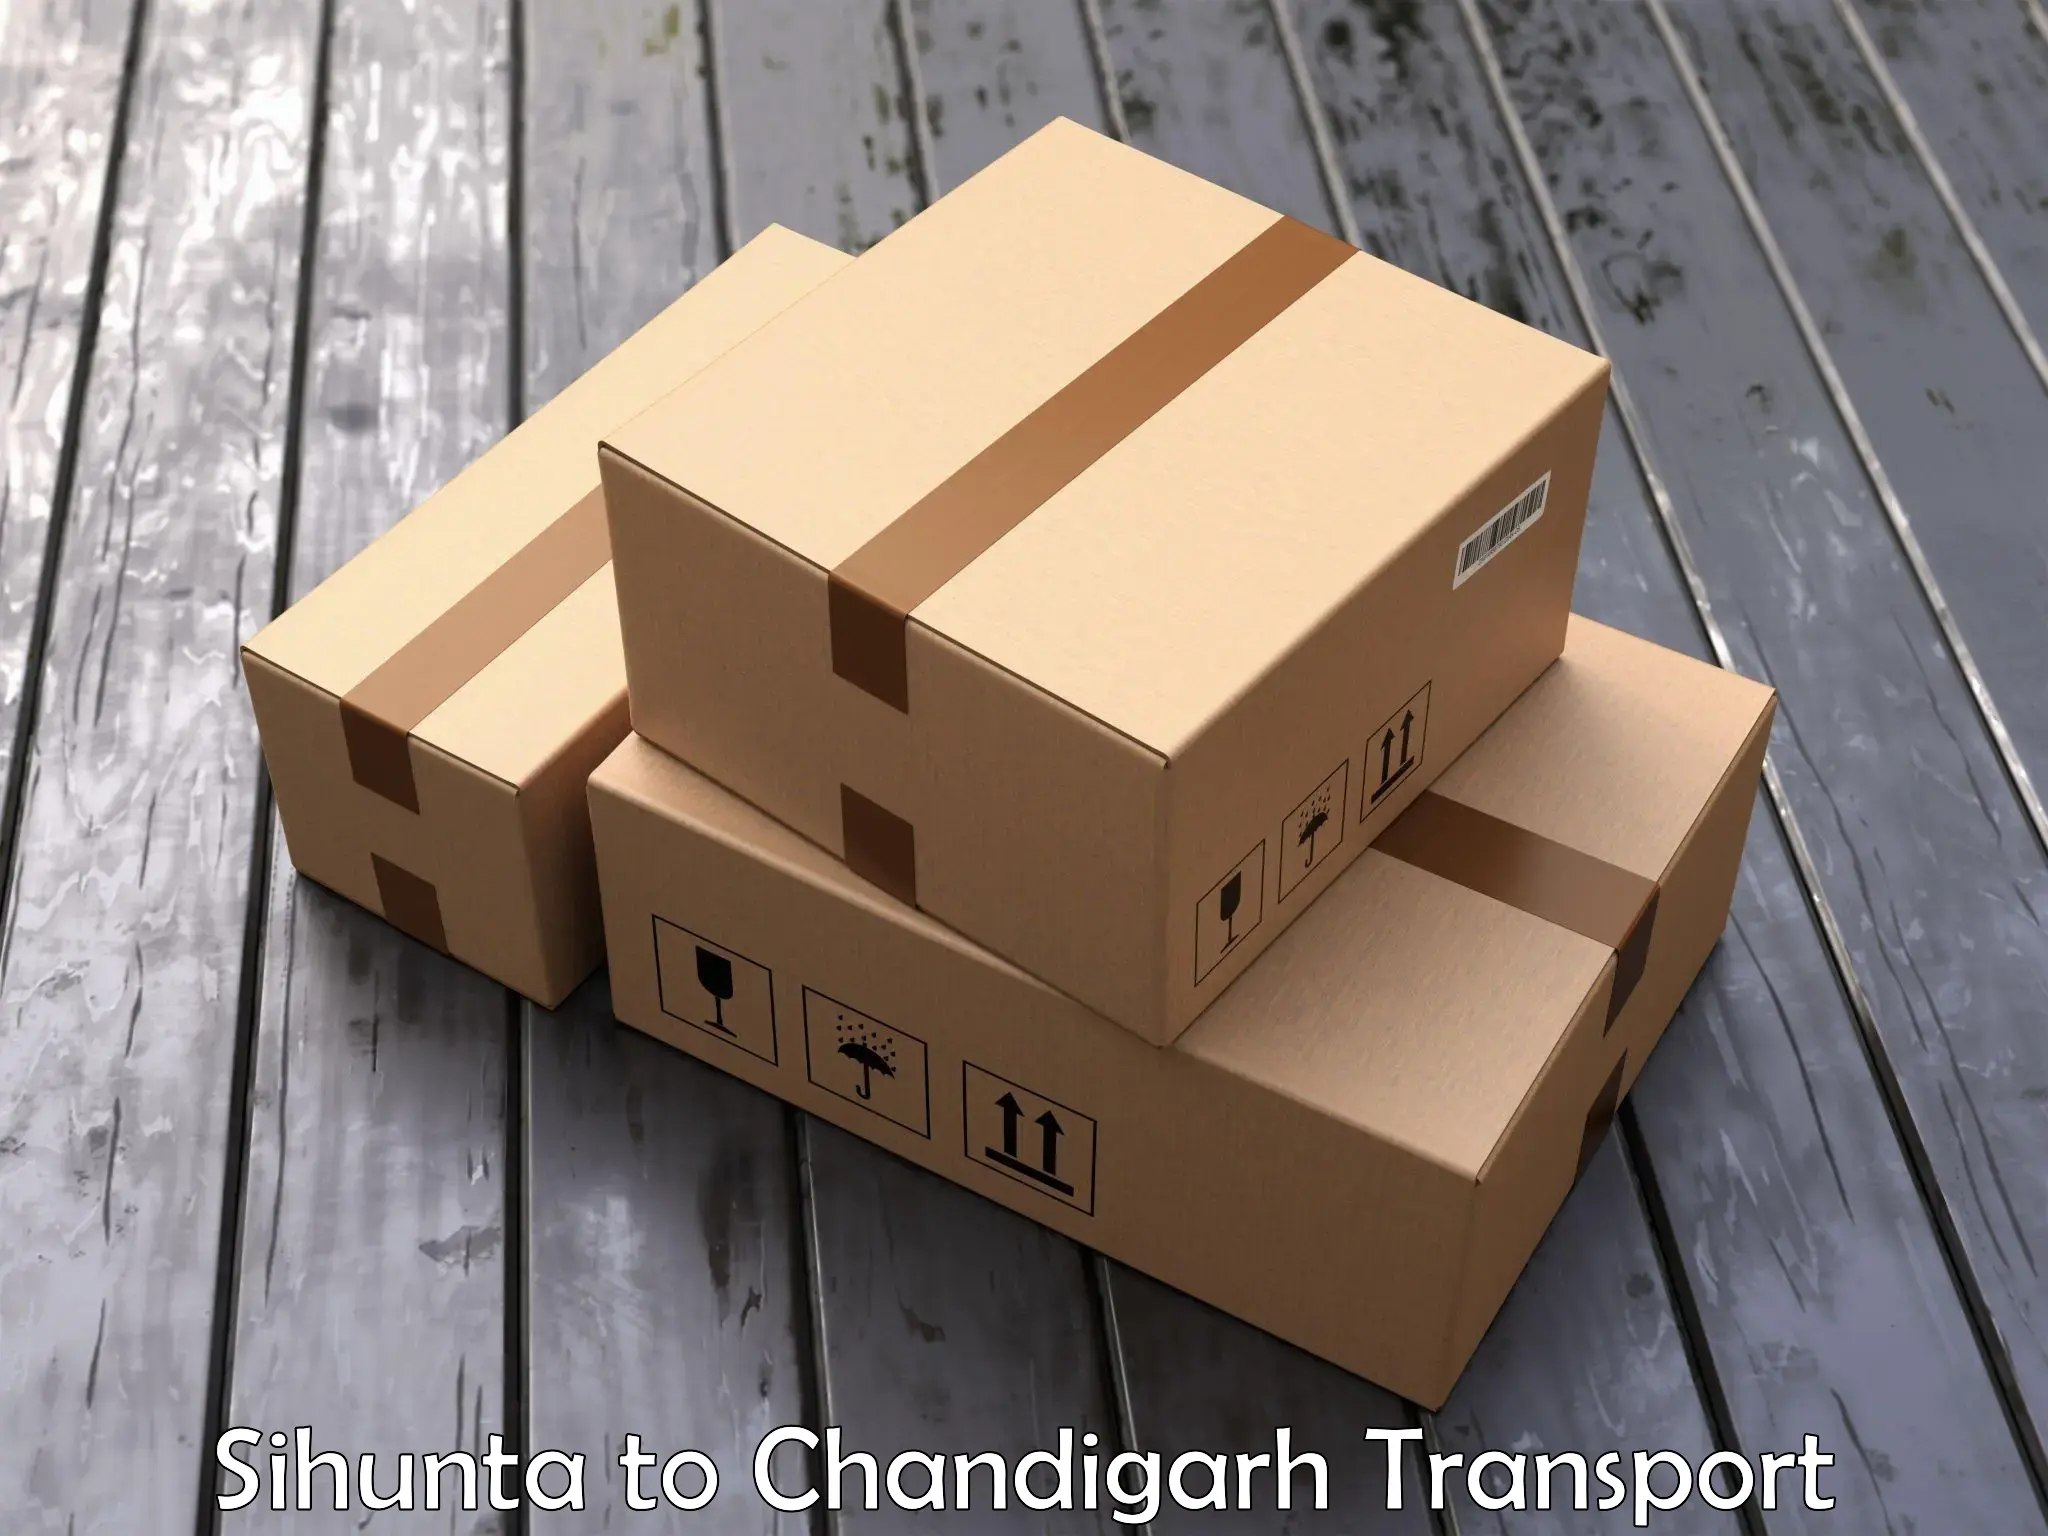 Cycle transportation service Sihunta to Chandigarh